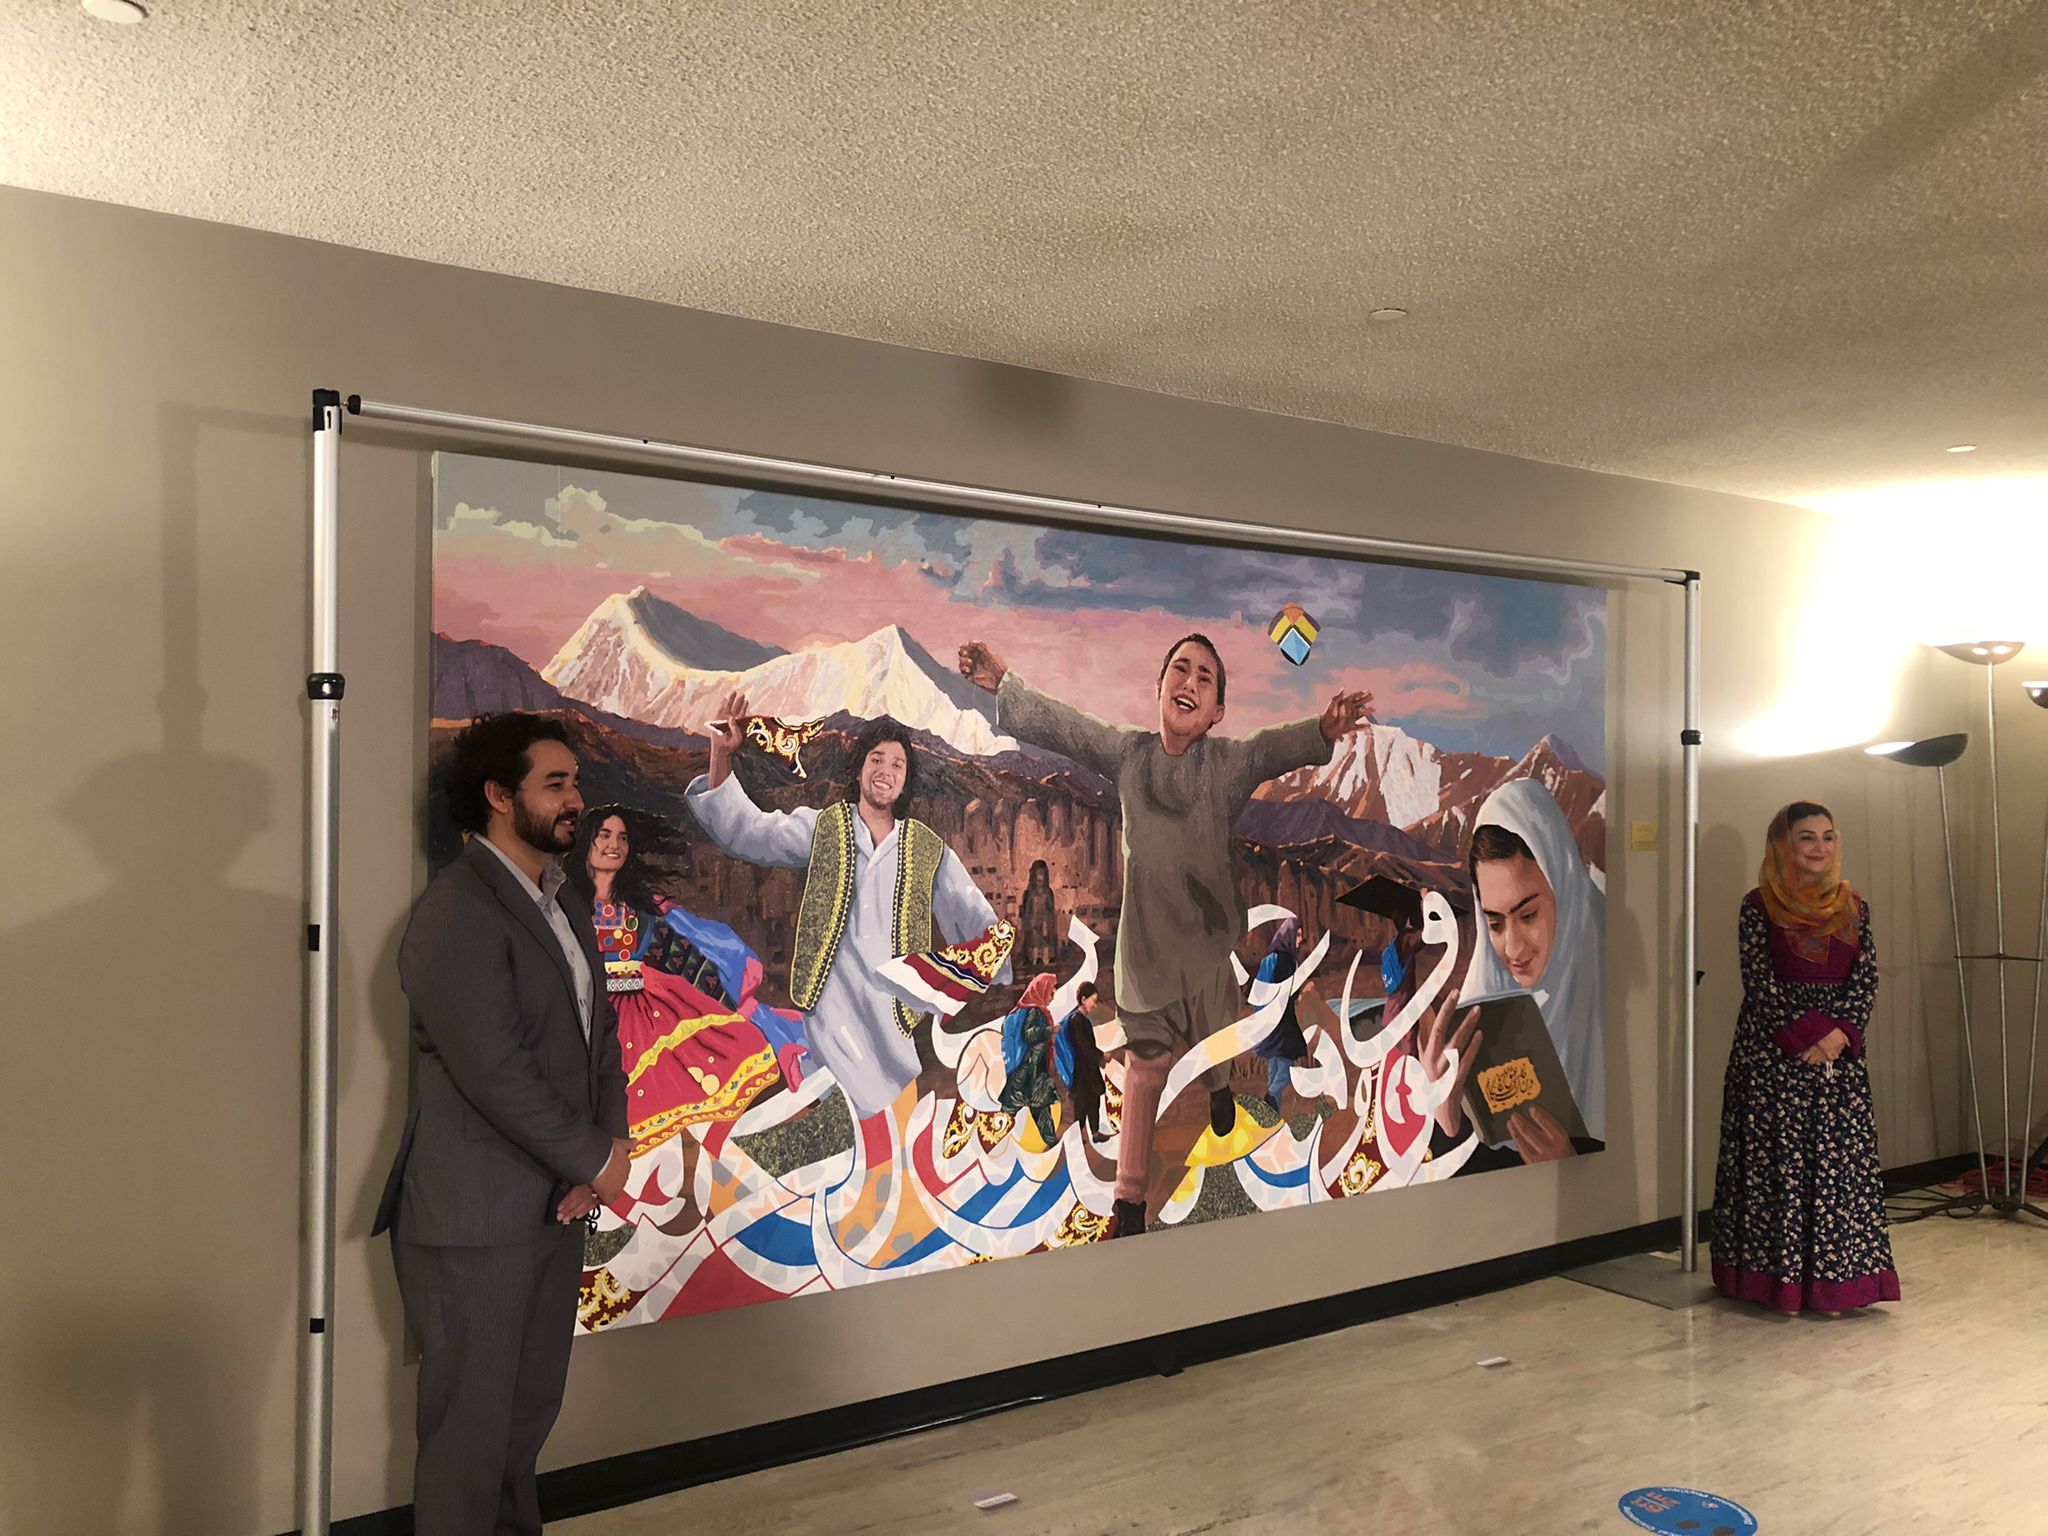 “This painting is also dedicated to all UN colleagues, national and international staff, who have tirelessly worked in Afghanistan. The girls carrying their blue UNICEF backpacks is exactly what I grew up with--our strides and determination for education with the solidarity of international community/UN,” added Raz.